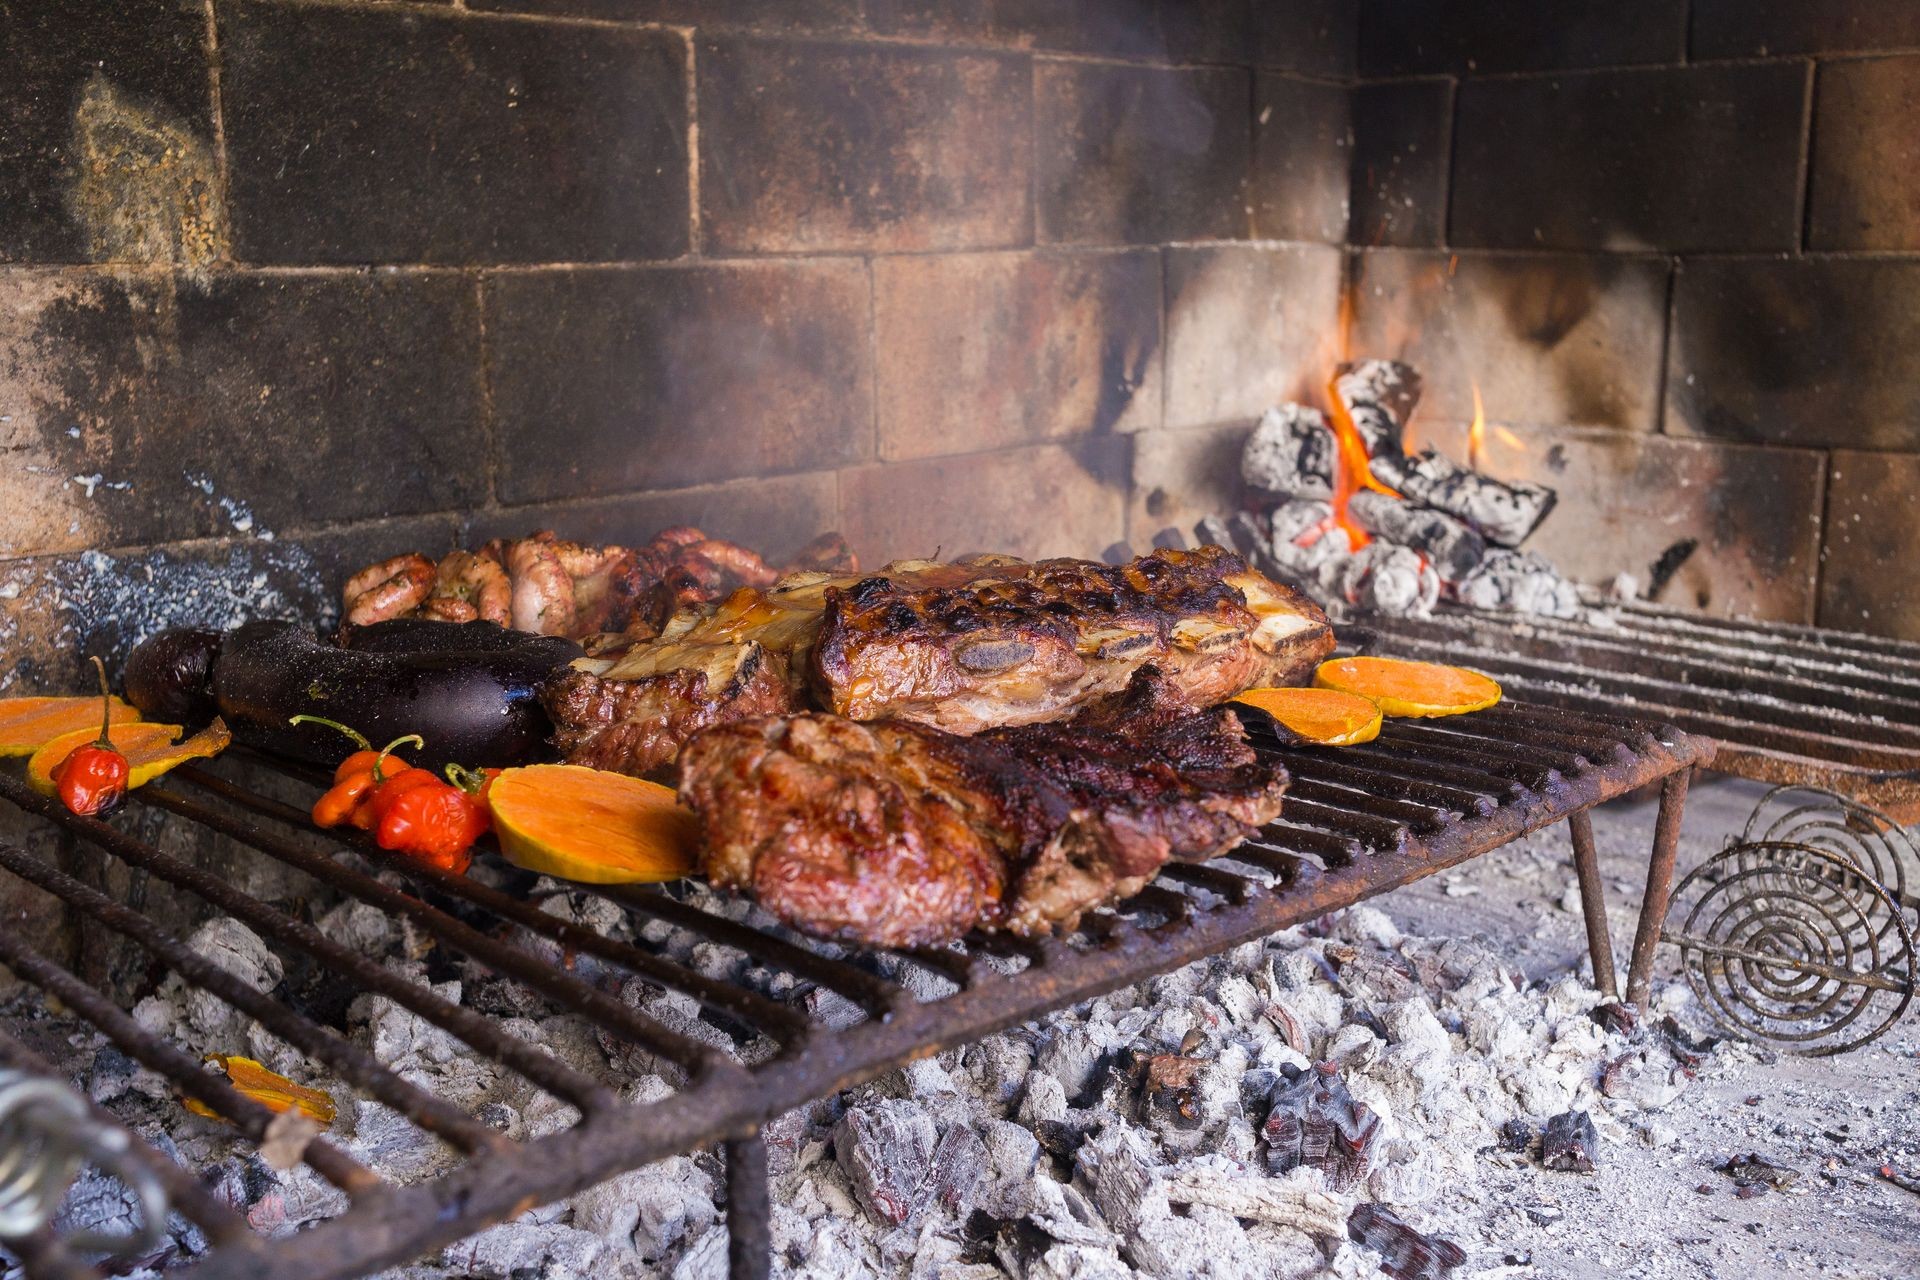 Barbecue for the lunch. Meat cuts and vegetables warming on the embers on an iron grill. Traditional Argentinian bbq.